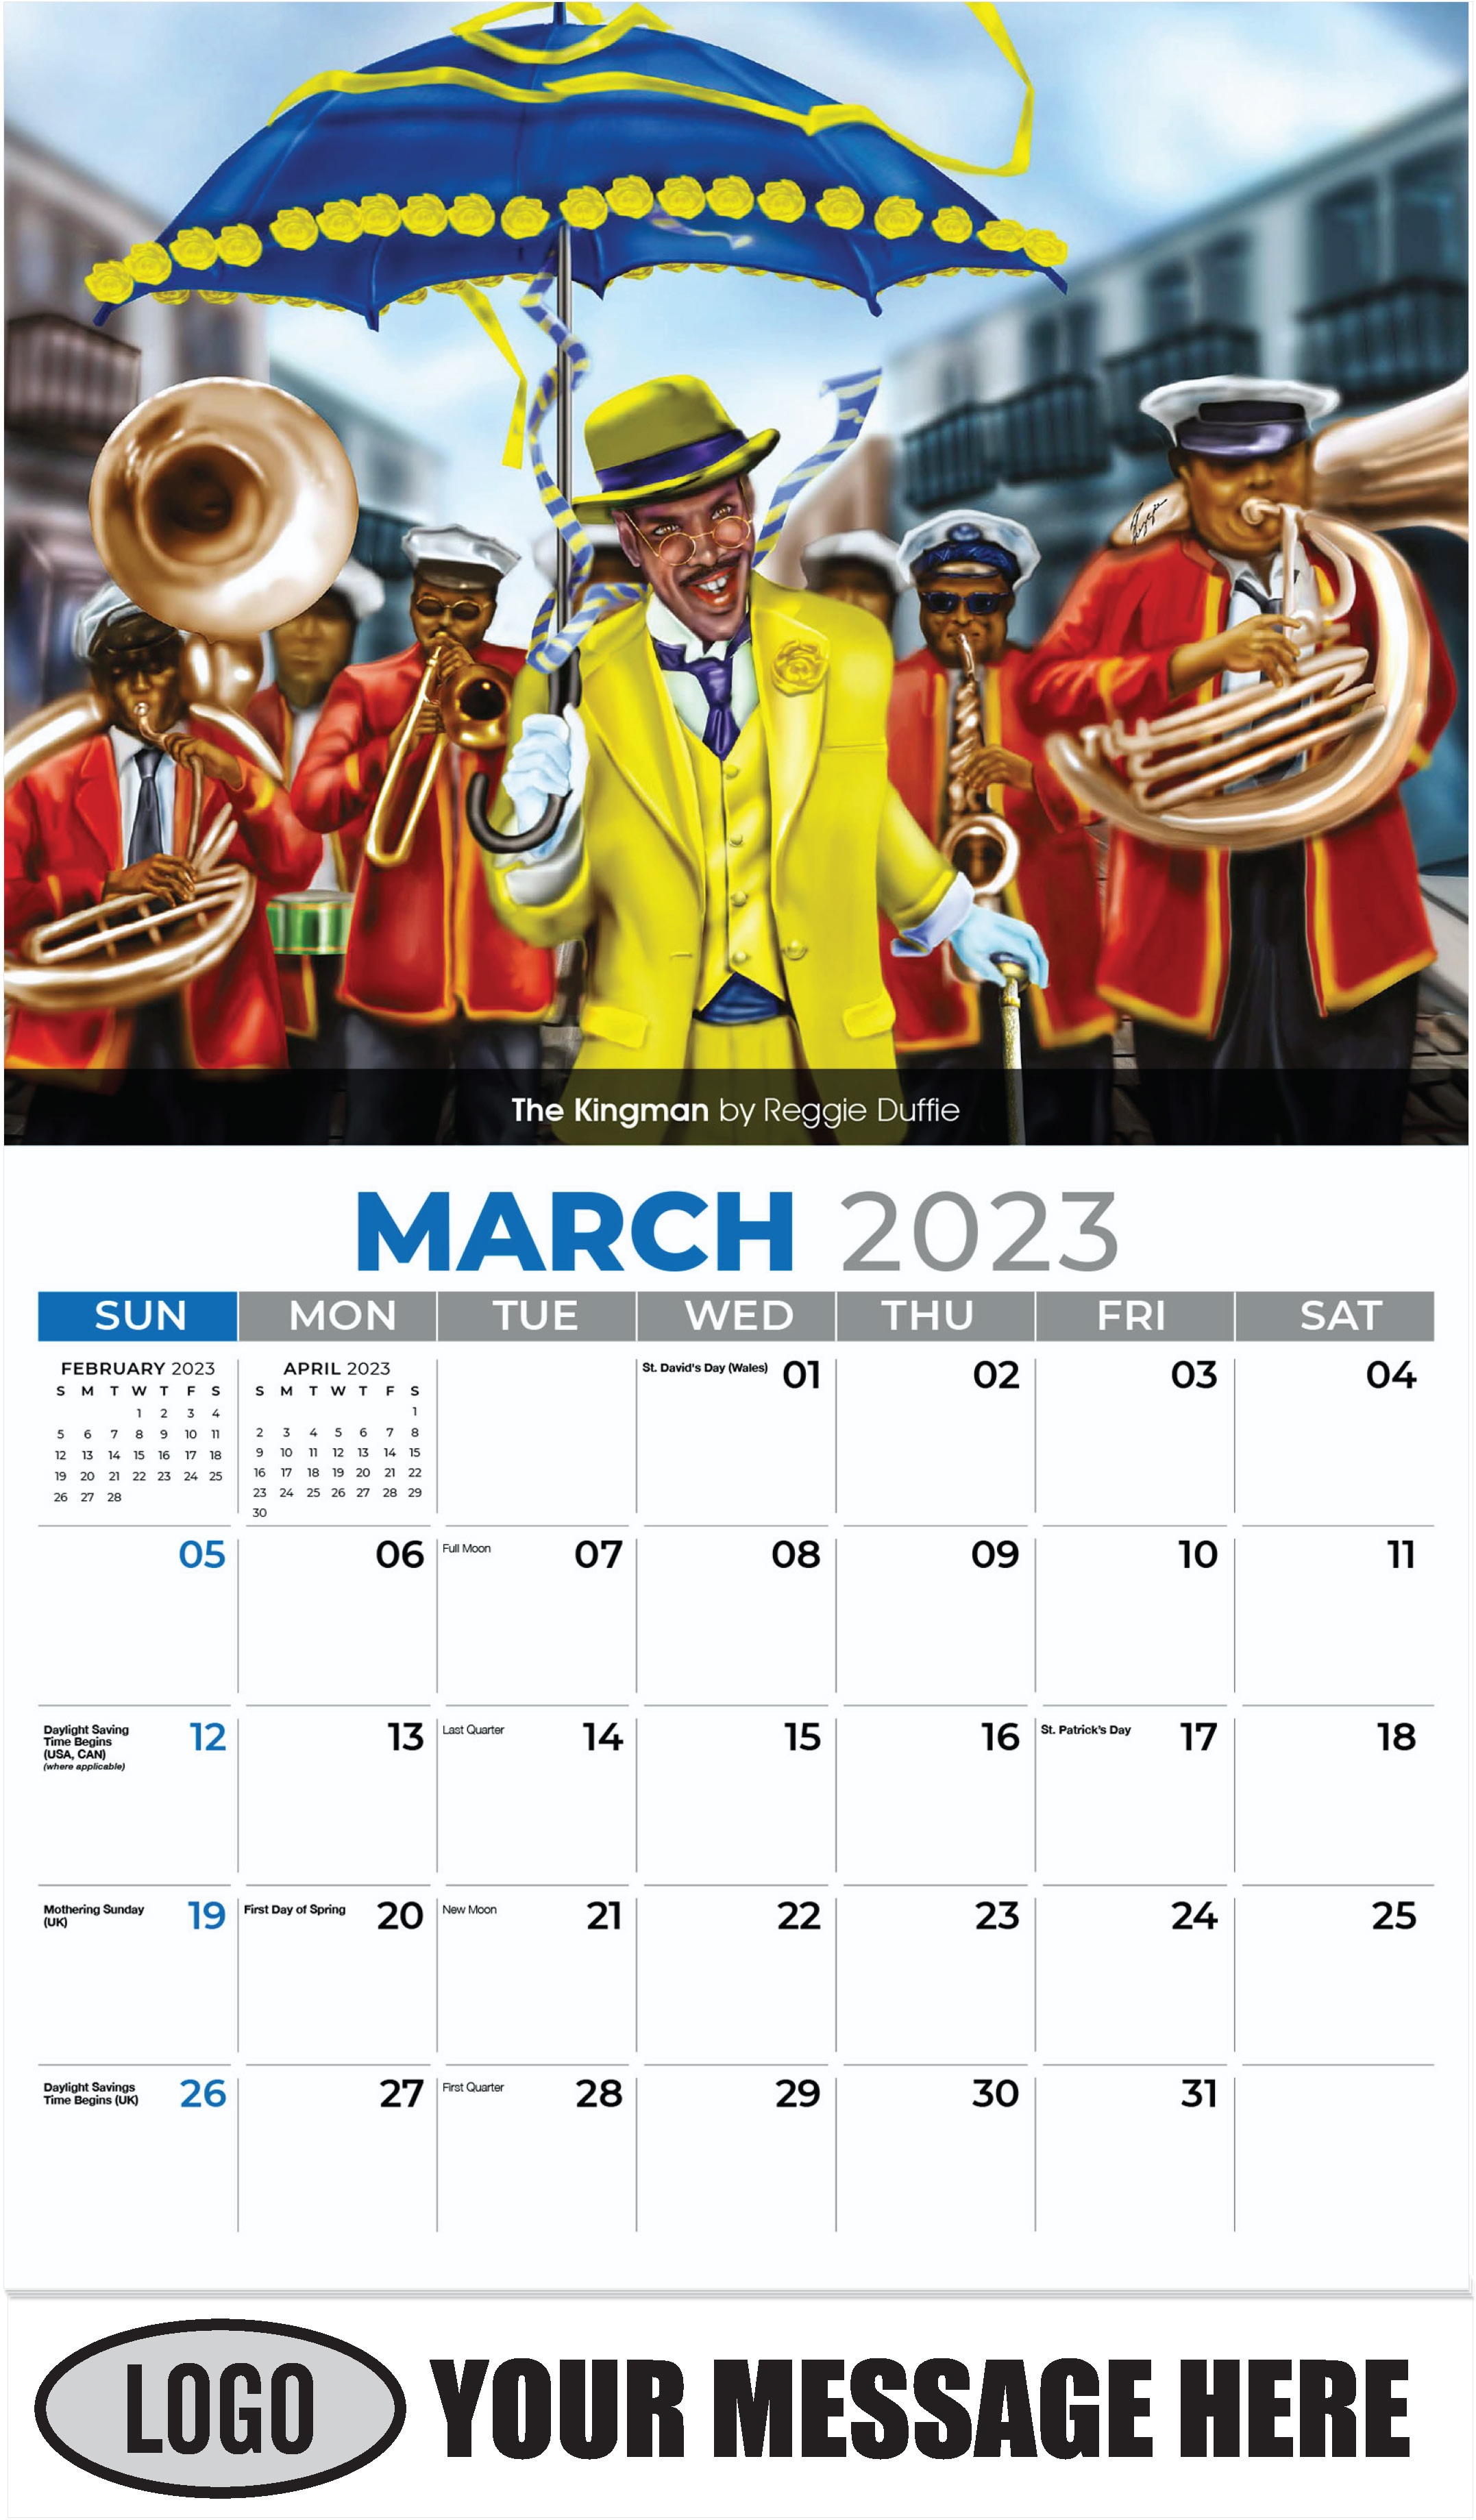 The Kingman by Reggie Duffie - March - Celebration of African American Art 2023 Promotional Calendar